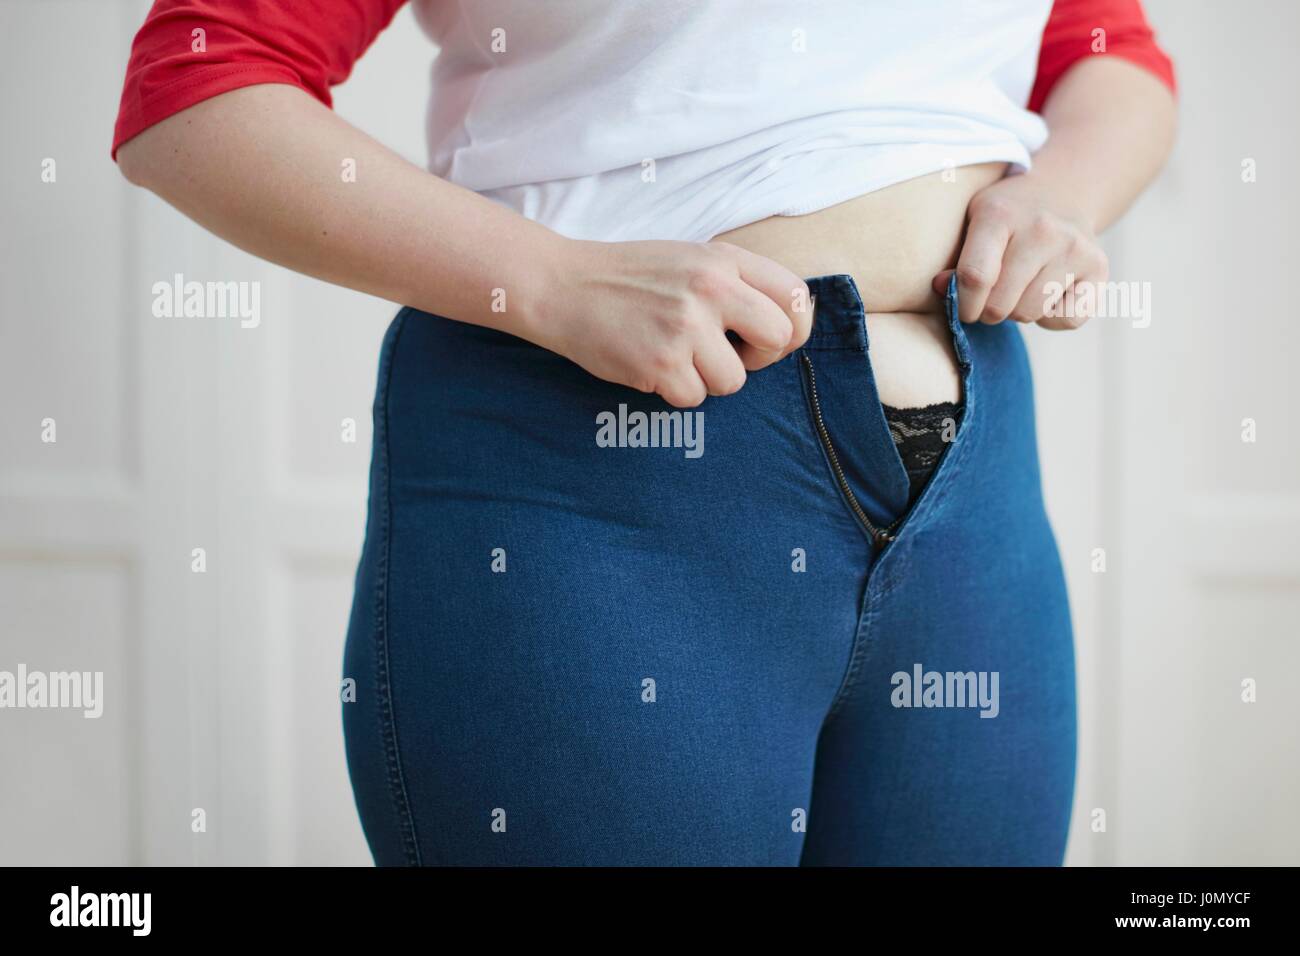 Woman trying to button jeans over tummy Stock Photo - Alamy